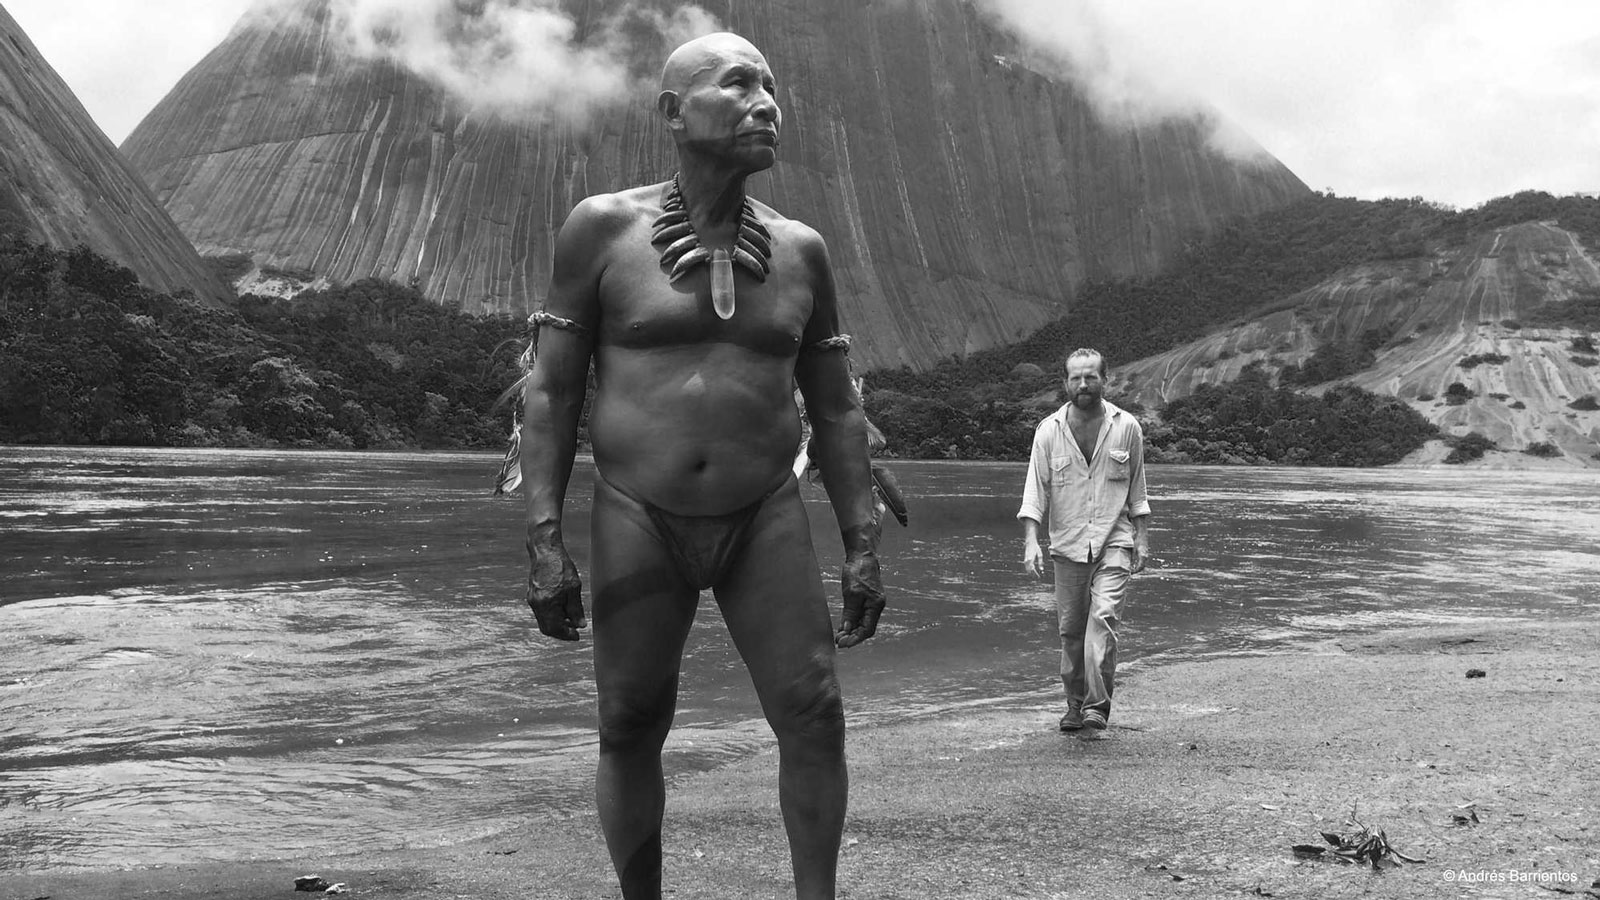 Antonio Bolivar as Karamakate and Jan Bijvoet as Theo in Ciro Guerra’s Embrace of the Serpent, 2015